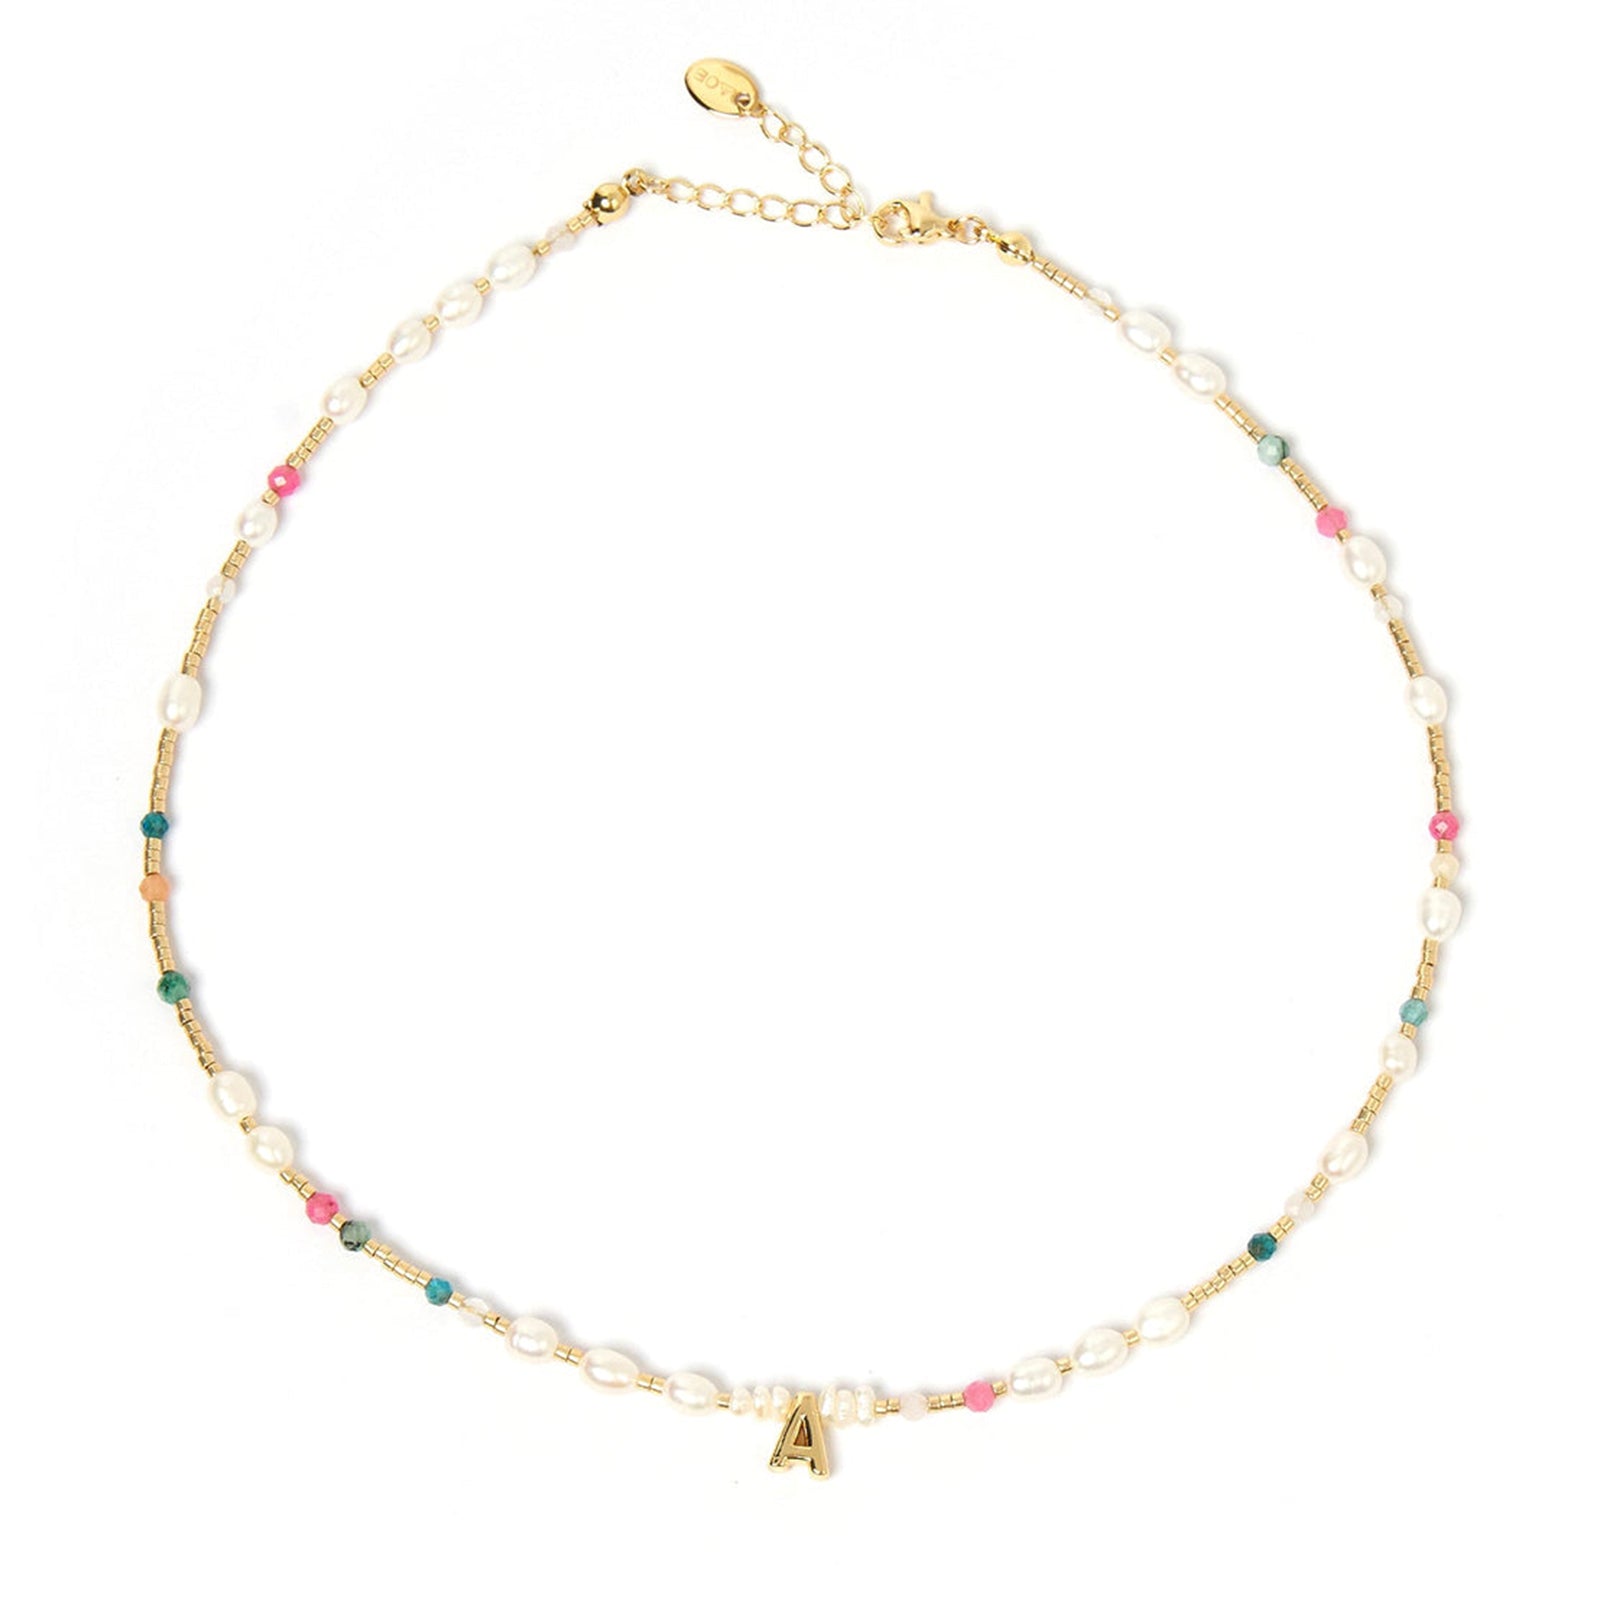 Arms Of Eve delicate beaded gemstone and pearl necklace featuring a letter charm, adorned with pearls and beads